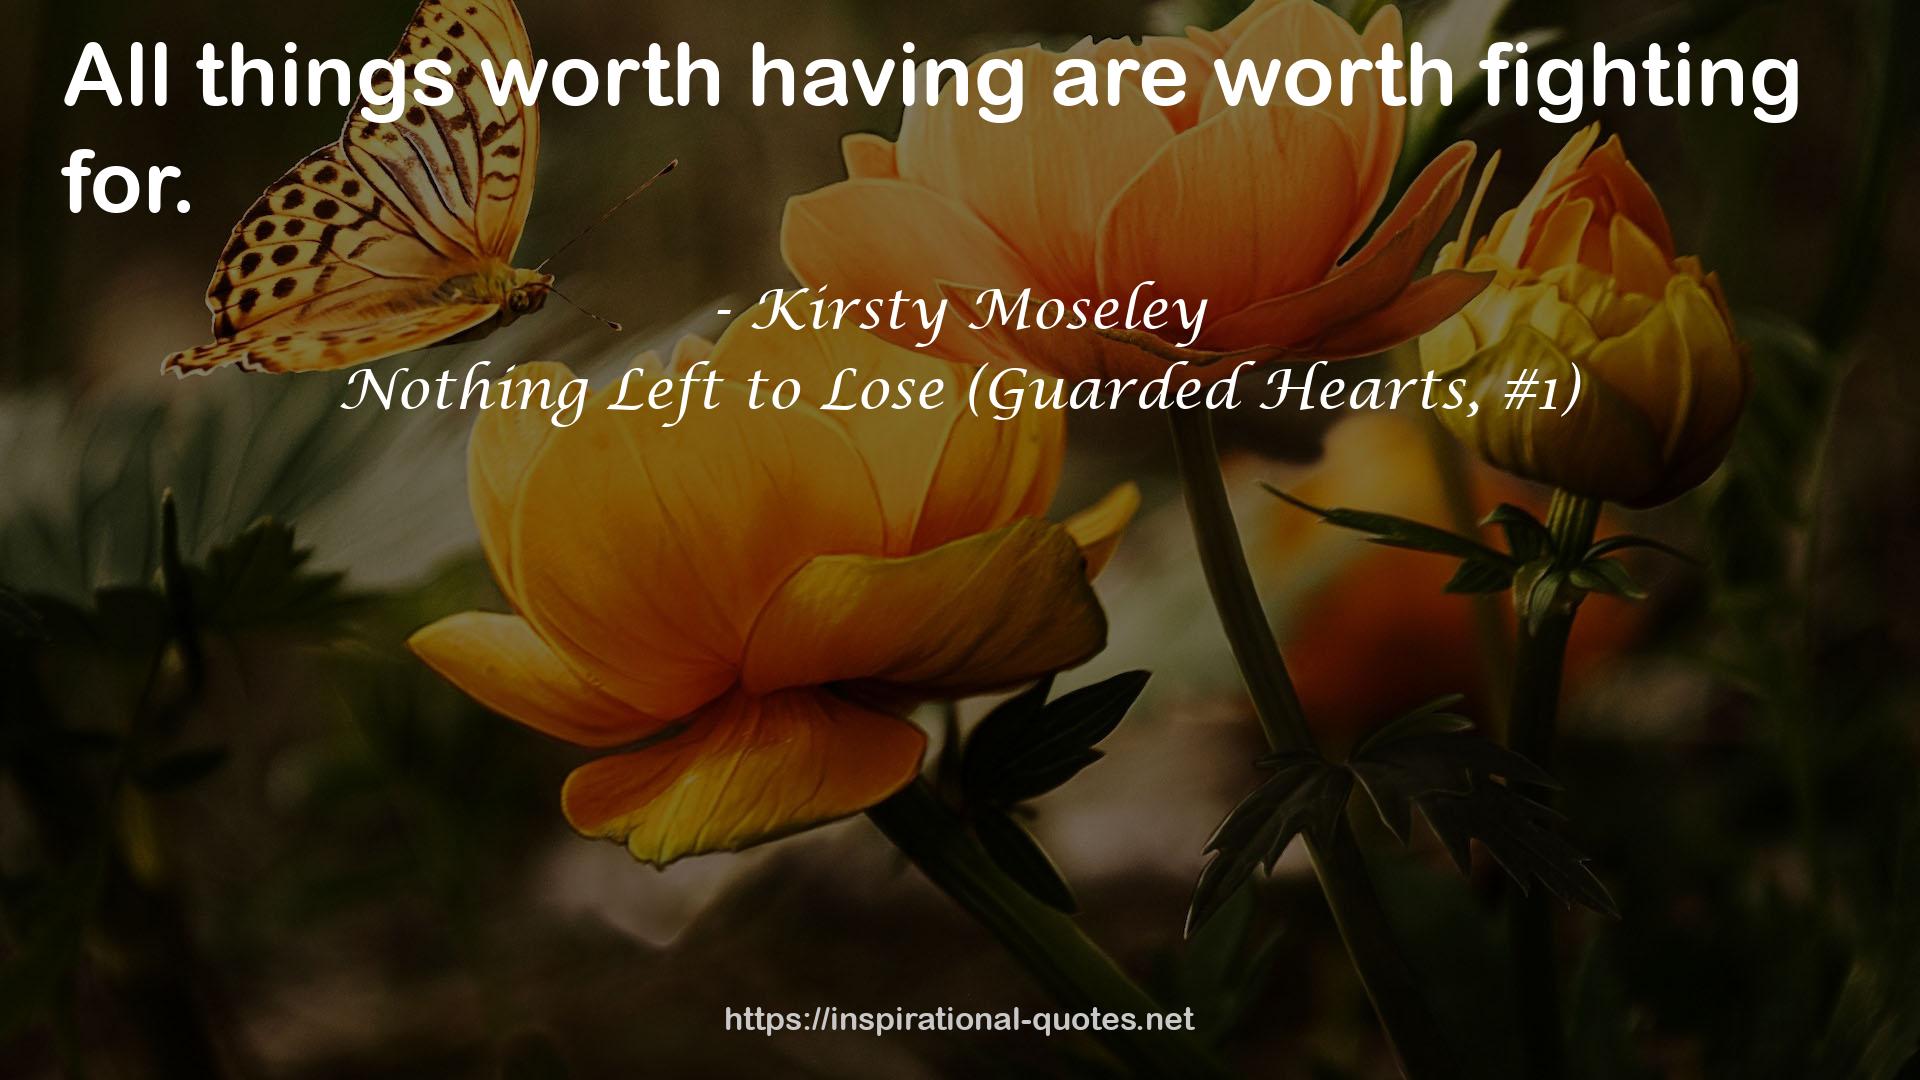 Nothing Left to Lose (Guarded Hearts, #1) QUOTES